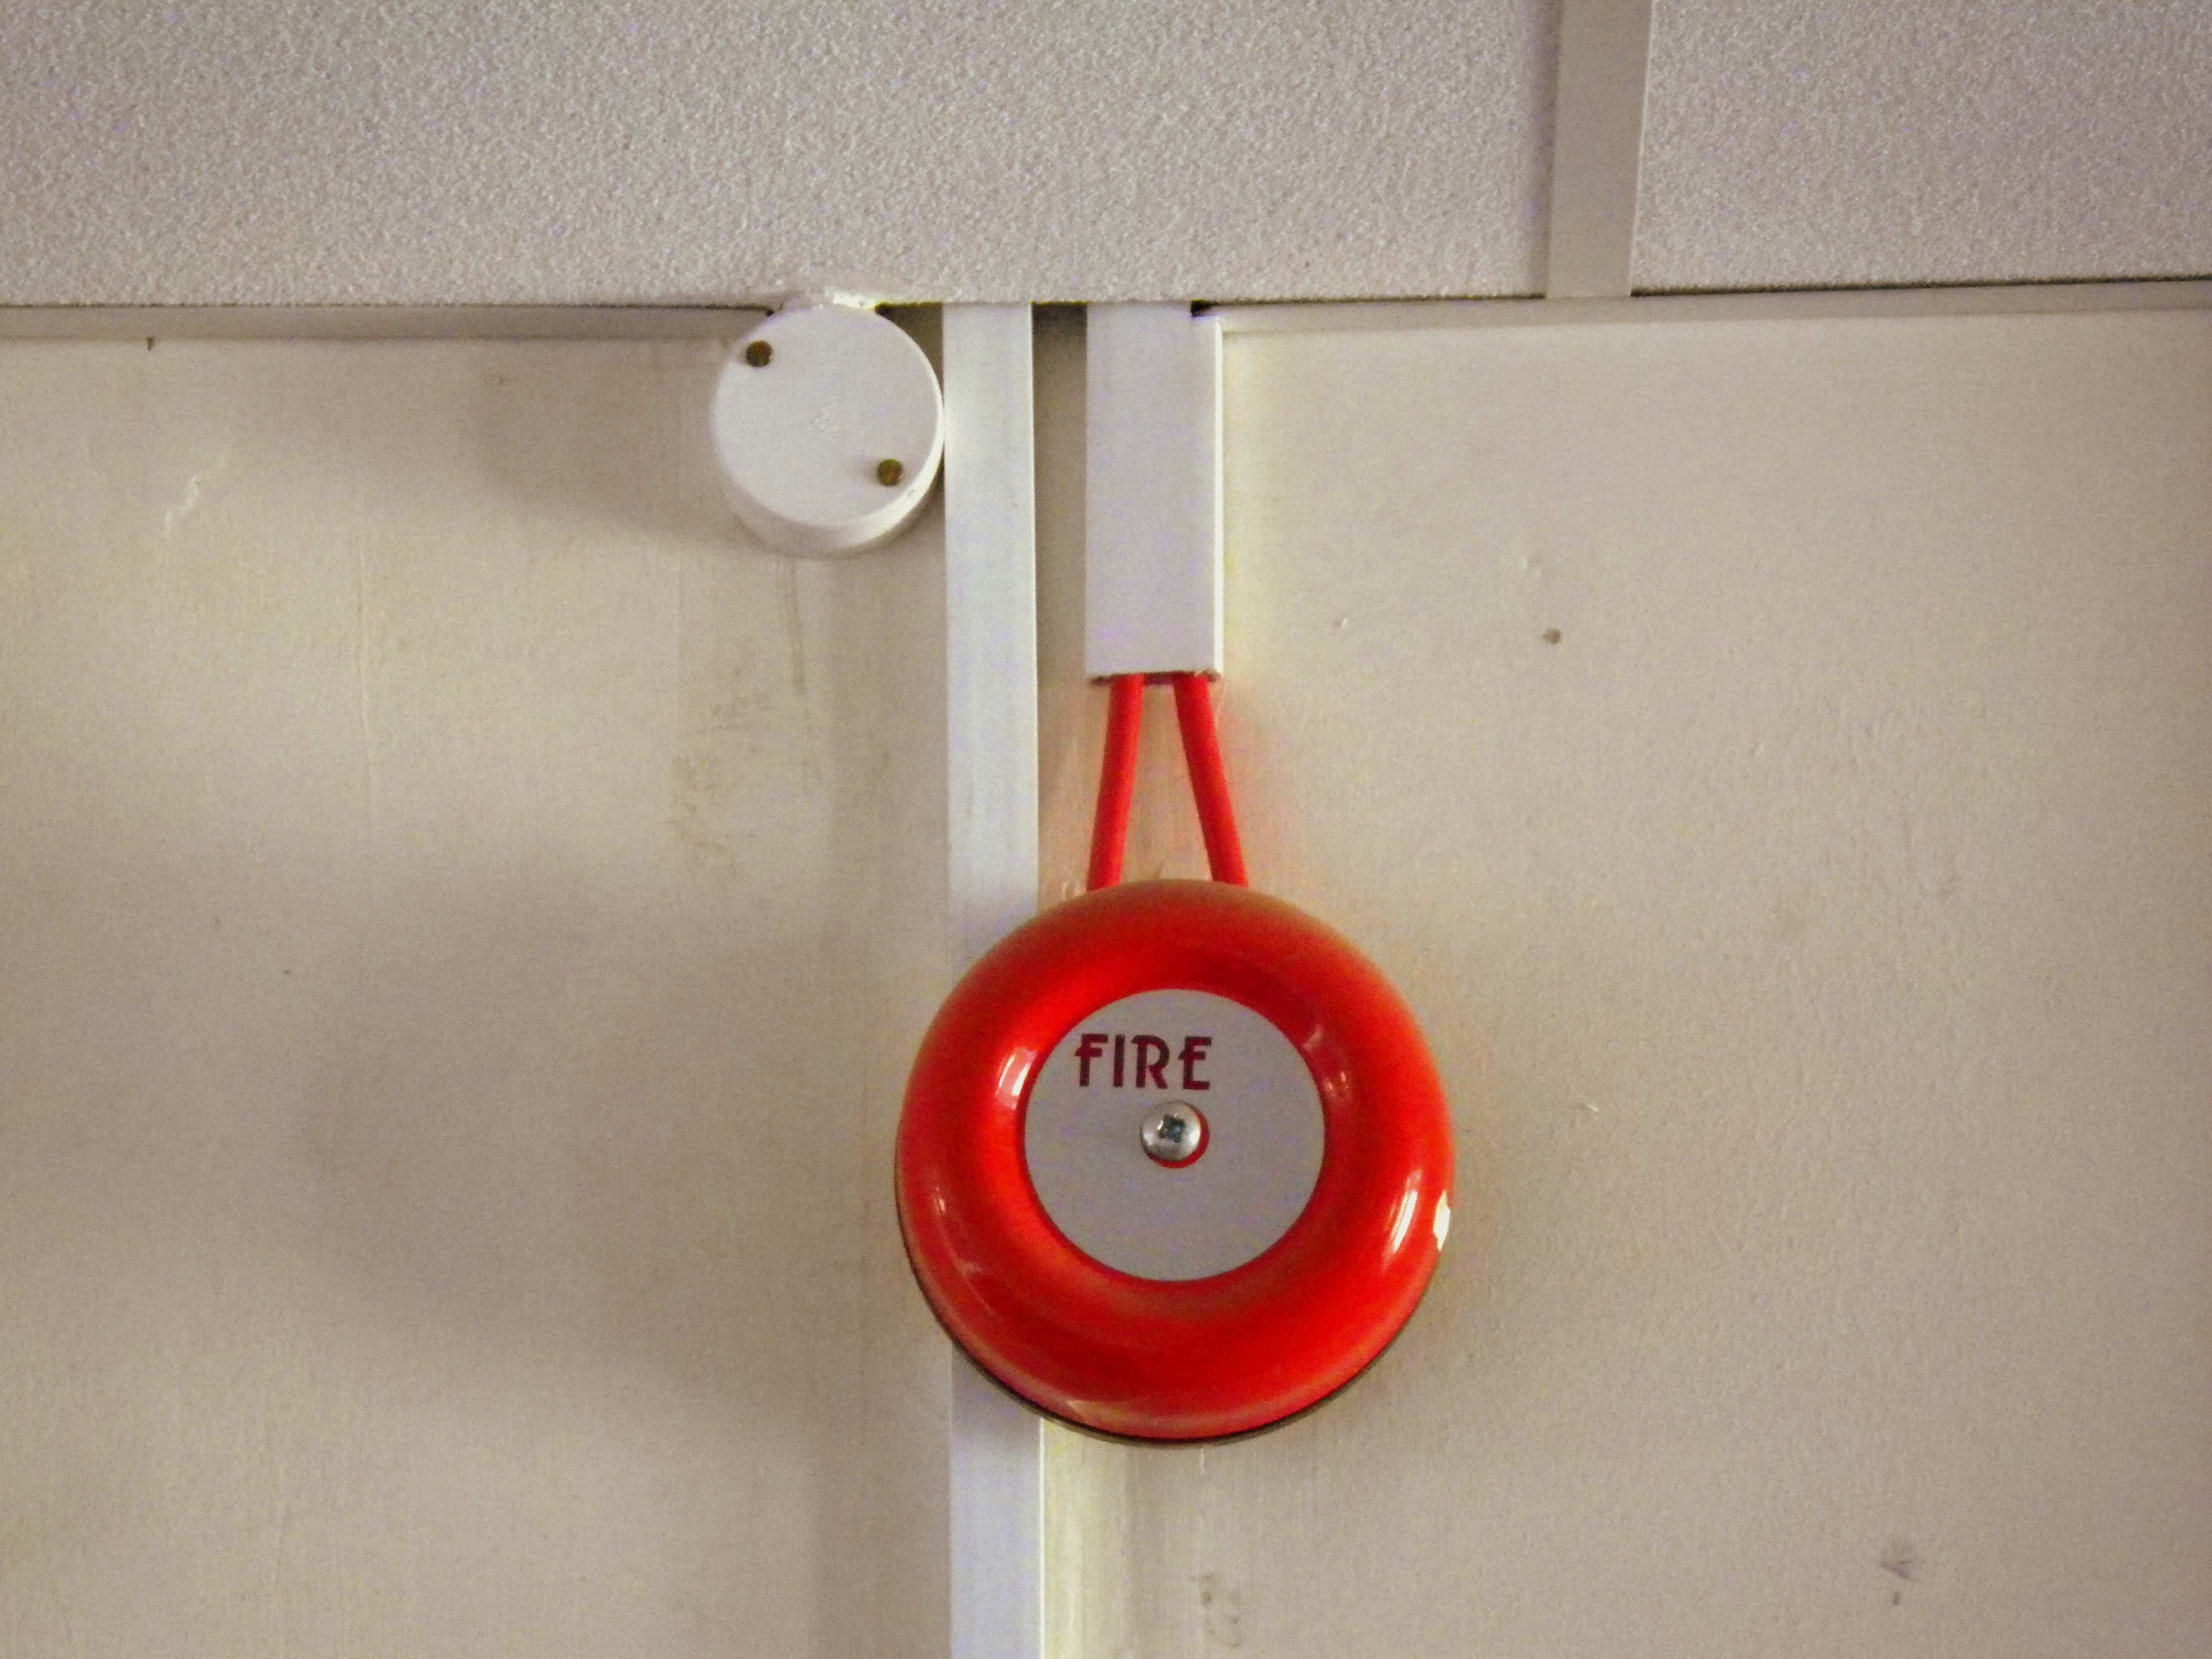 Fire bell at Roebuck House - let's hope we never need it